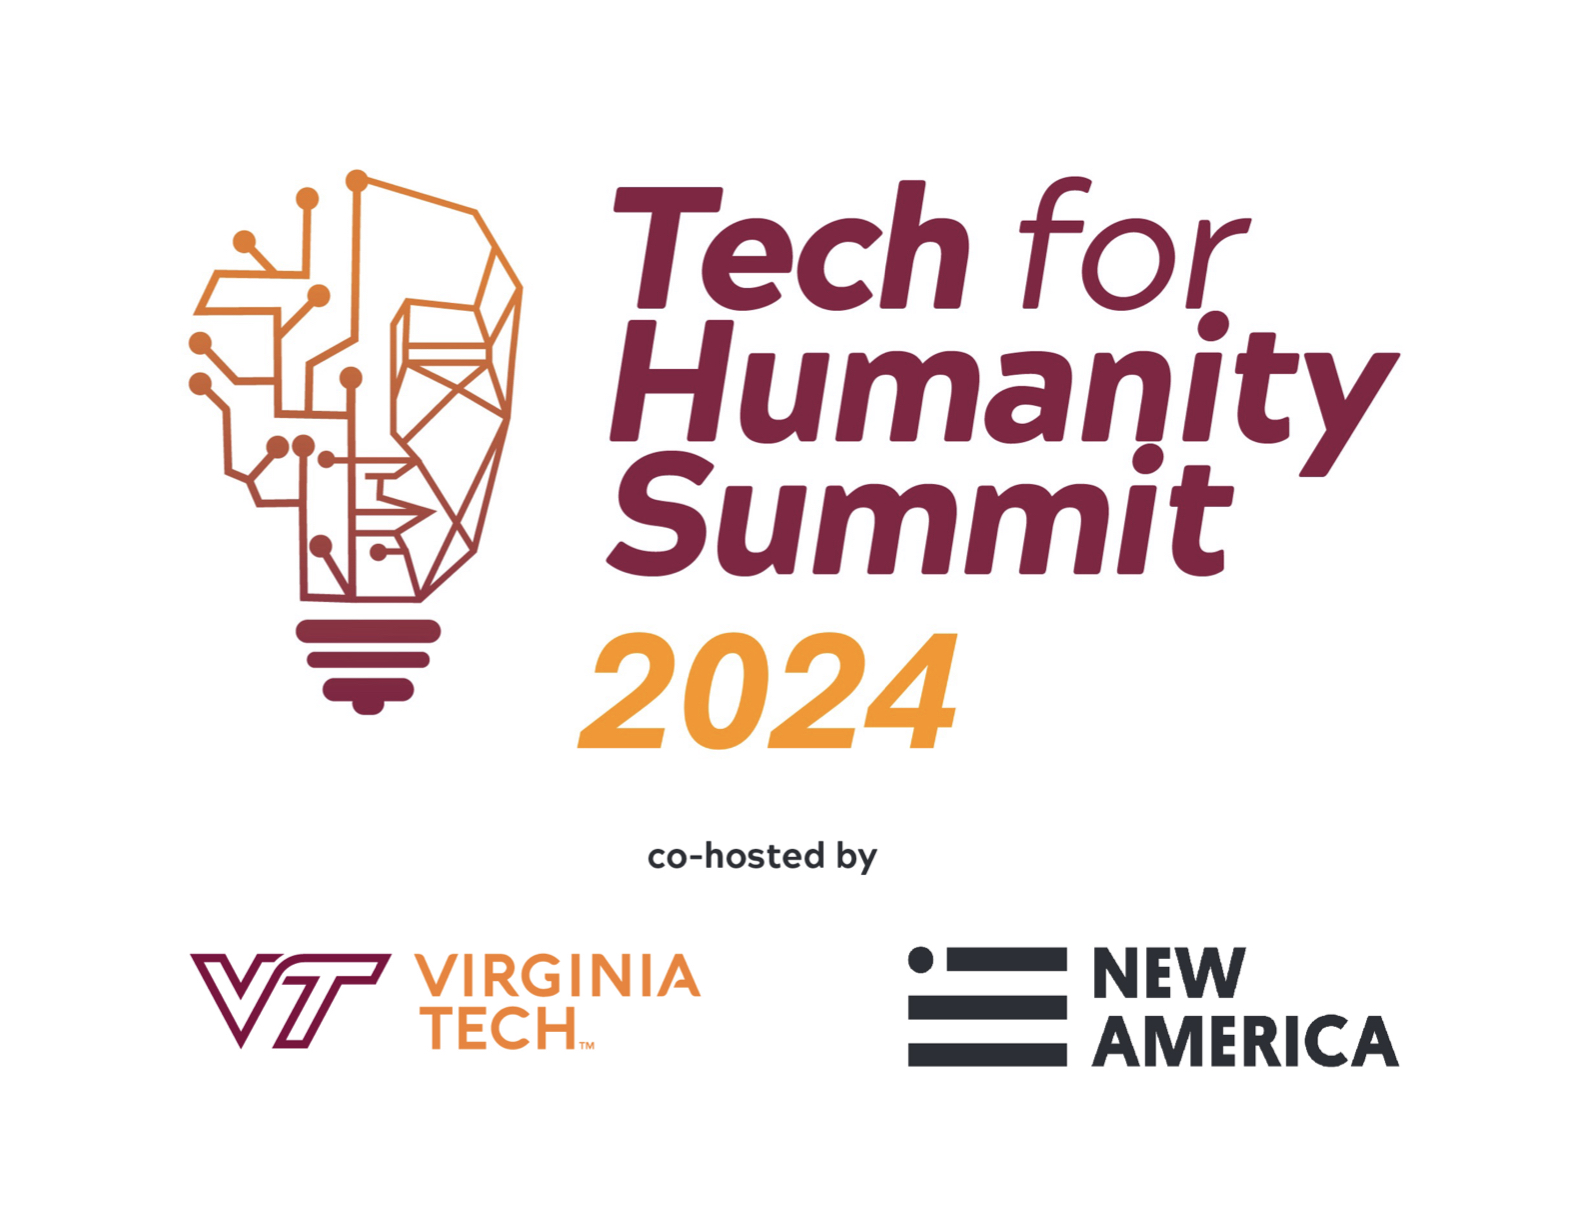 The 2024 Tech for Humanity Summit